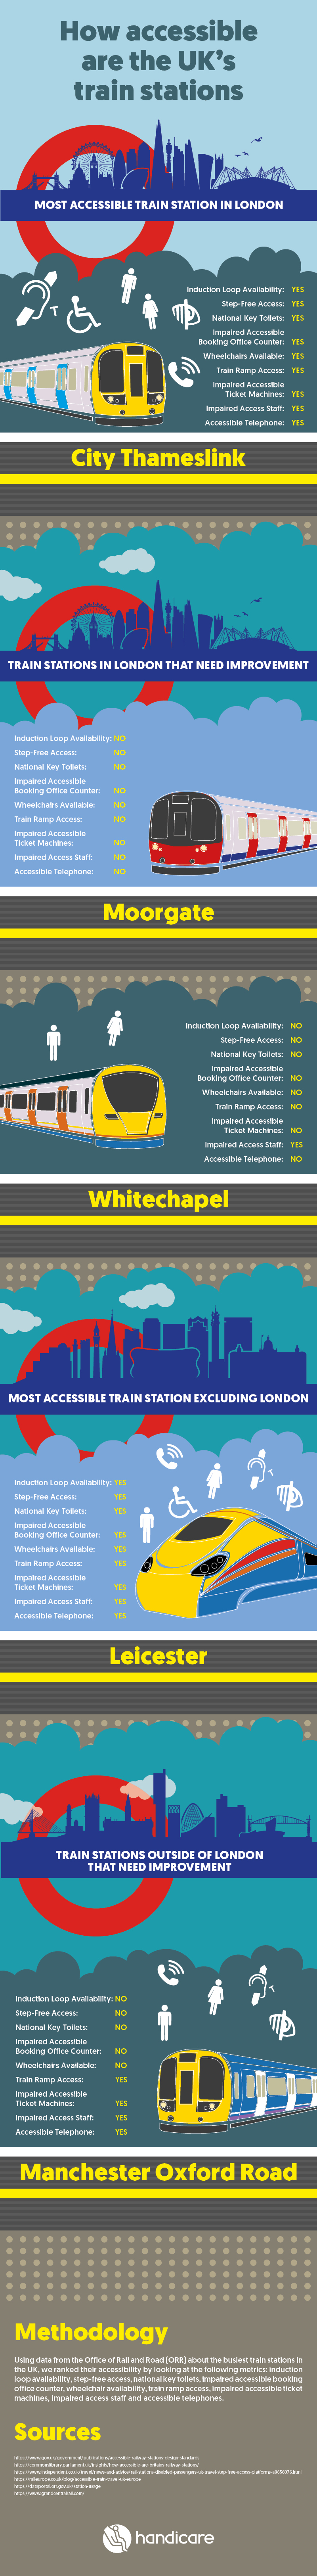 How accessible are the train stations in the UK